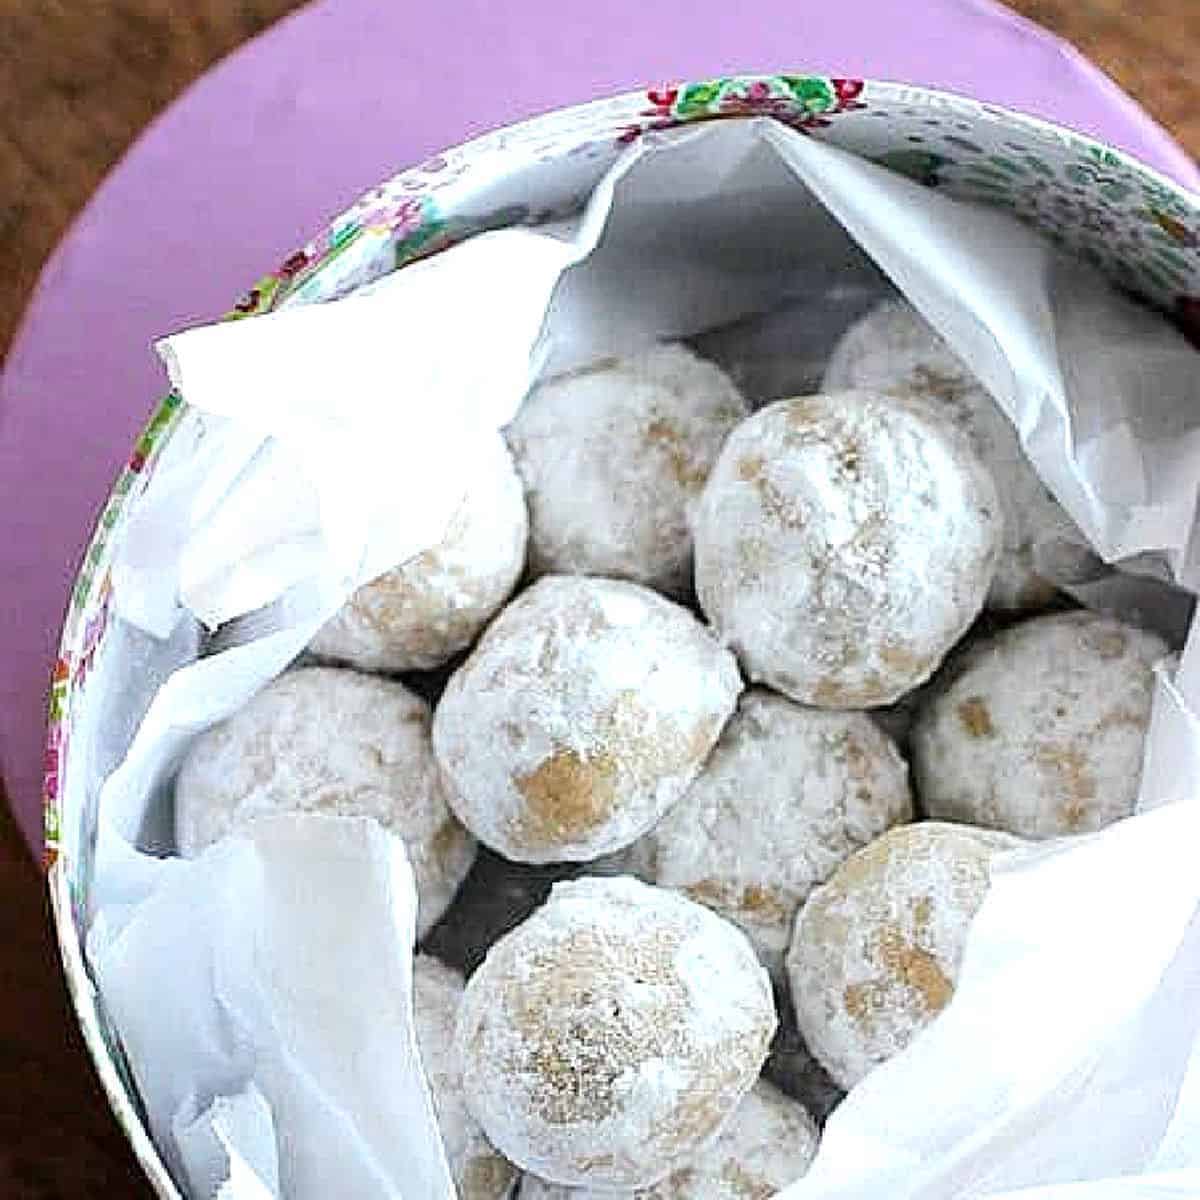 A box of Mexican wedding cookies.